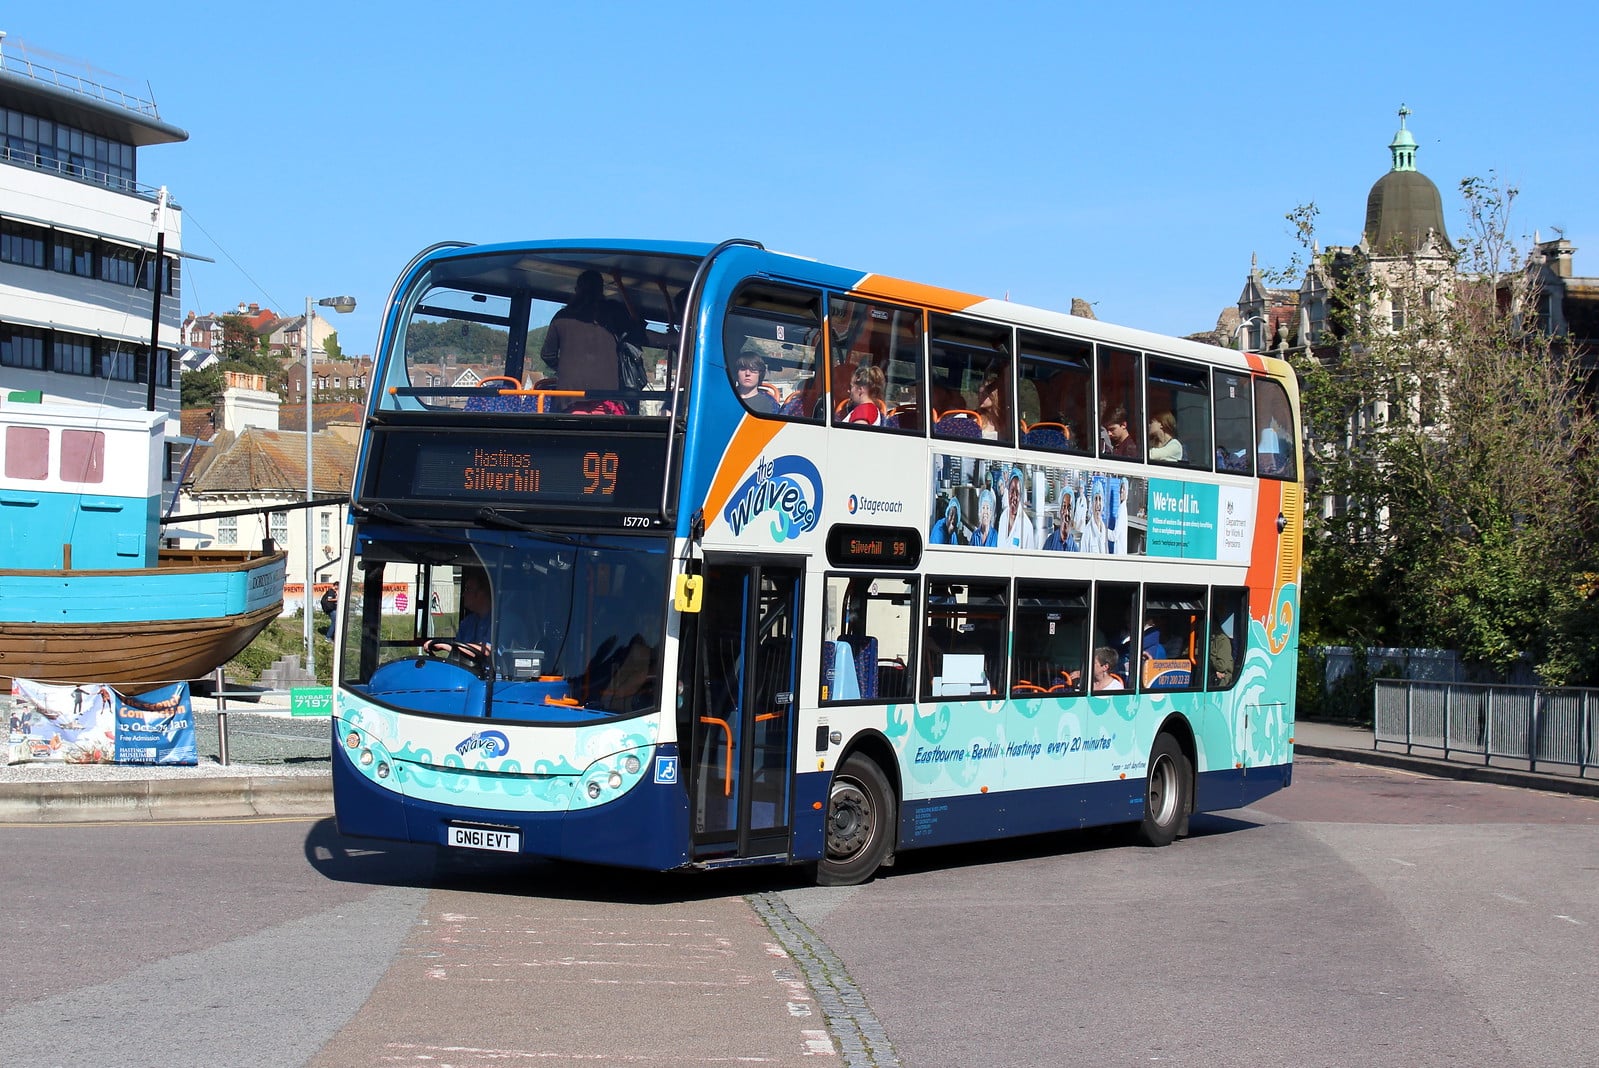 A route '99' double-decker Stagecoach bus with ‘Silverhill’ on the destination blind.